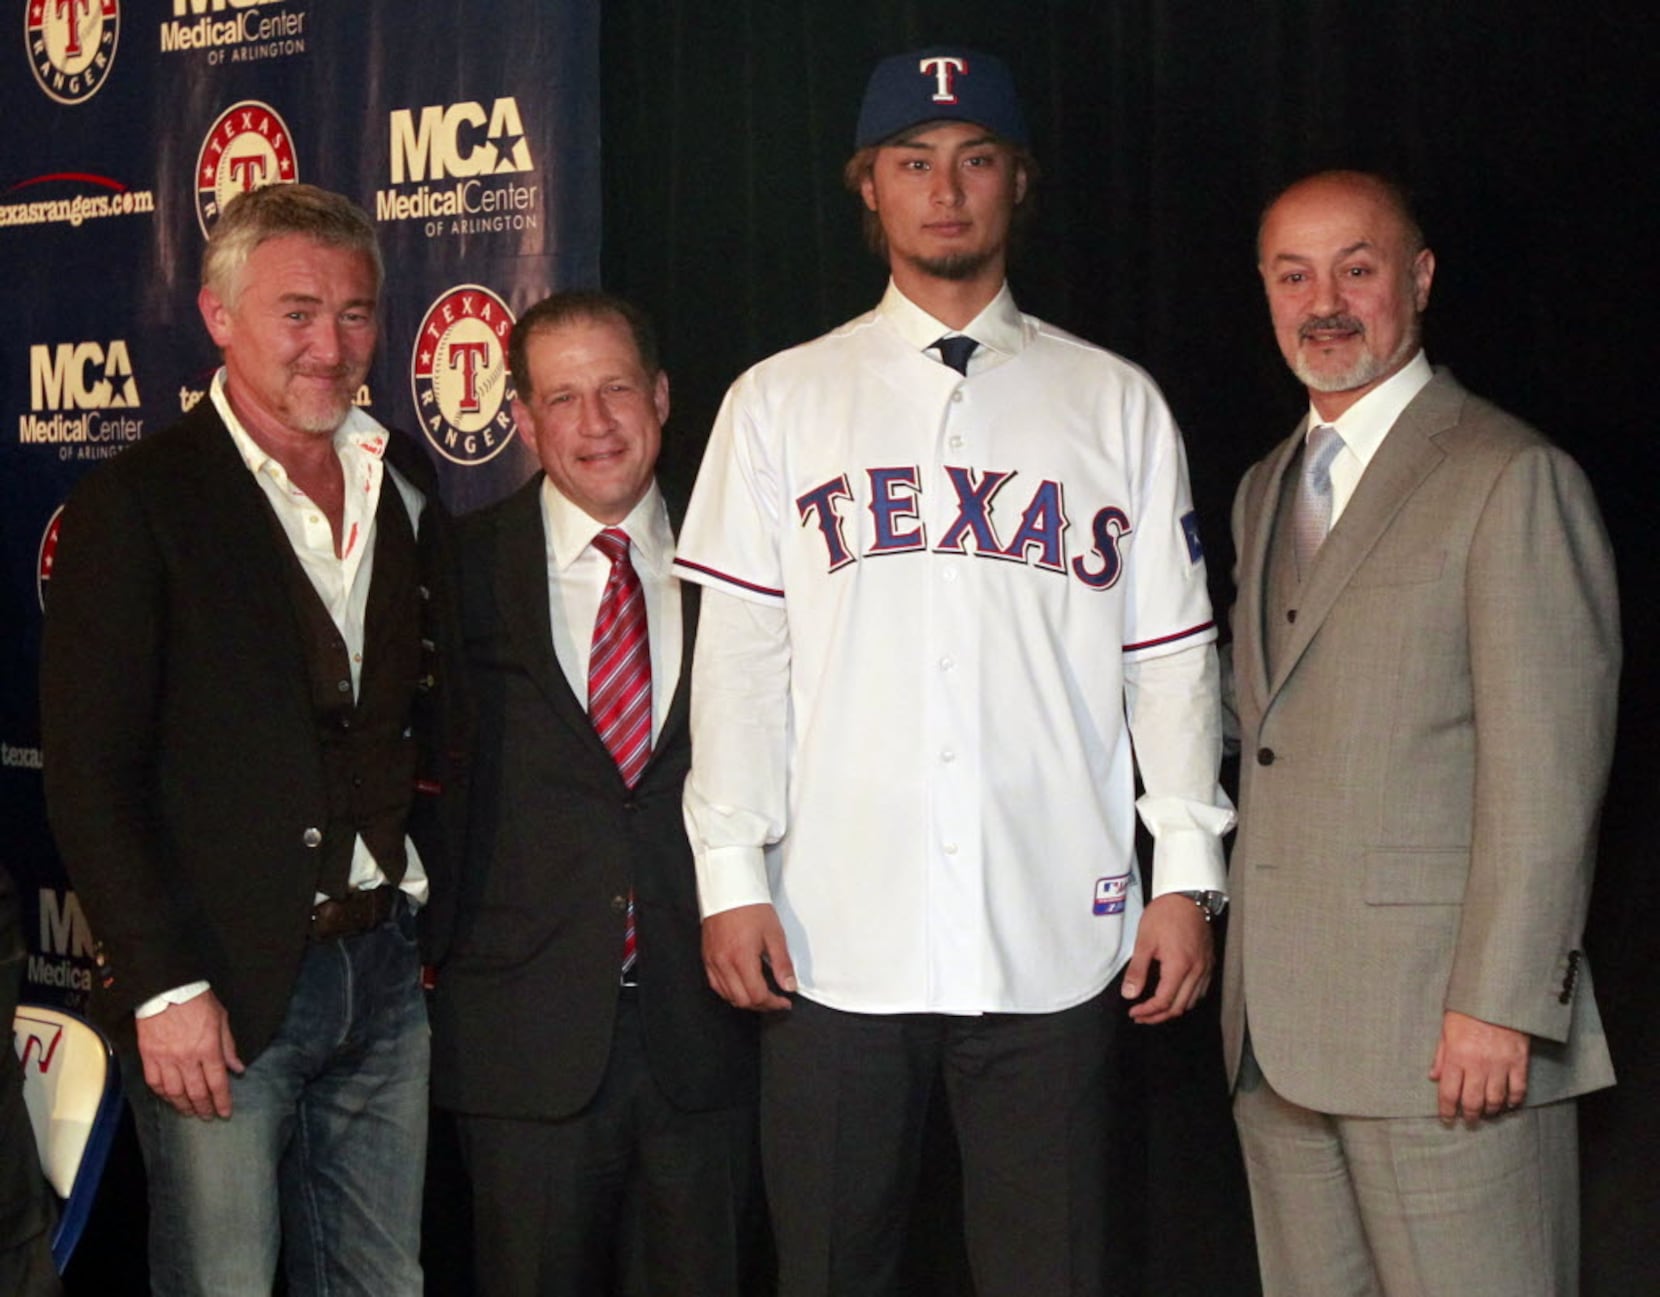 Under new border restrictions, Yu Darvish's father might not be able to  enter the US to see son pitch